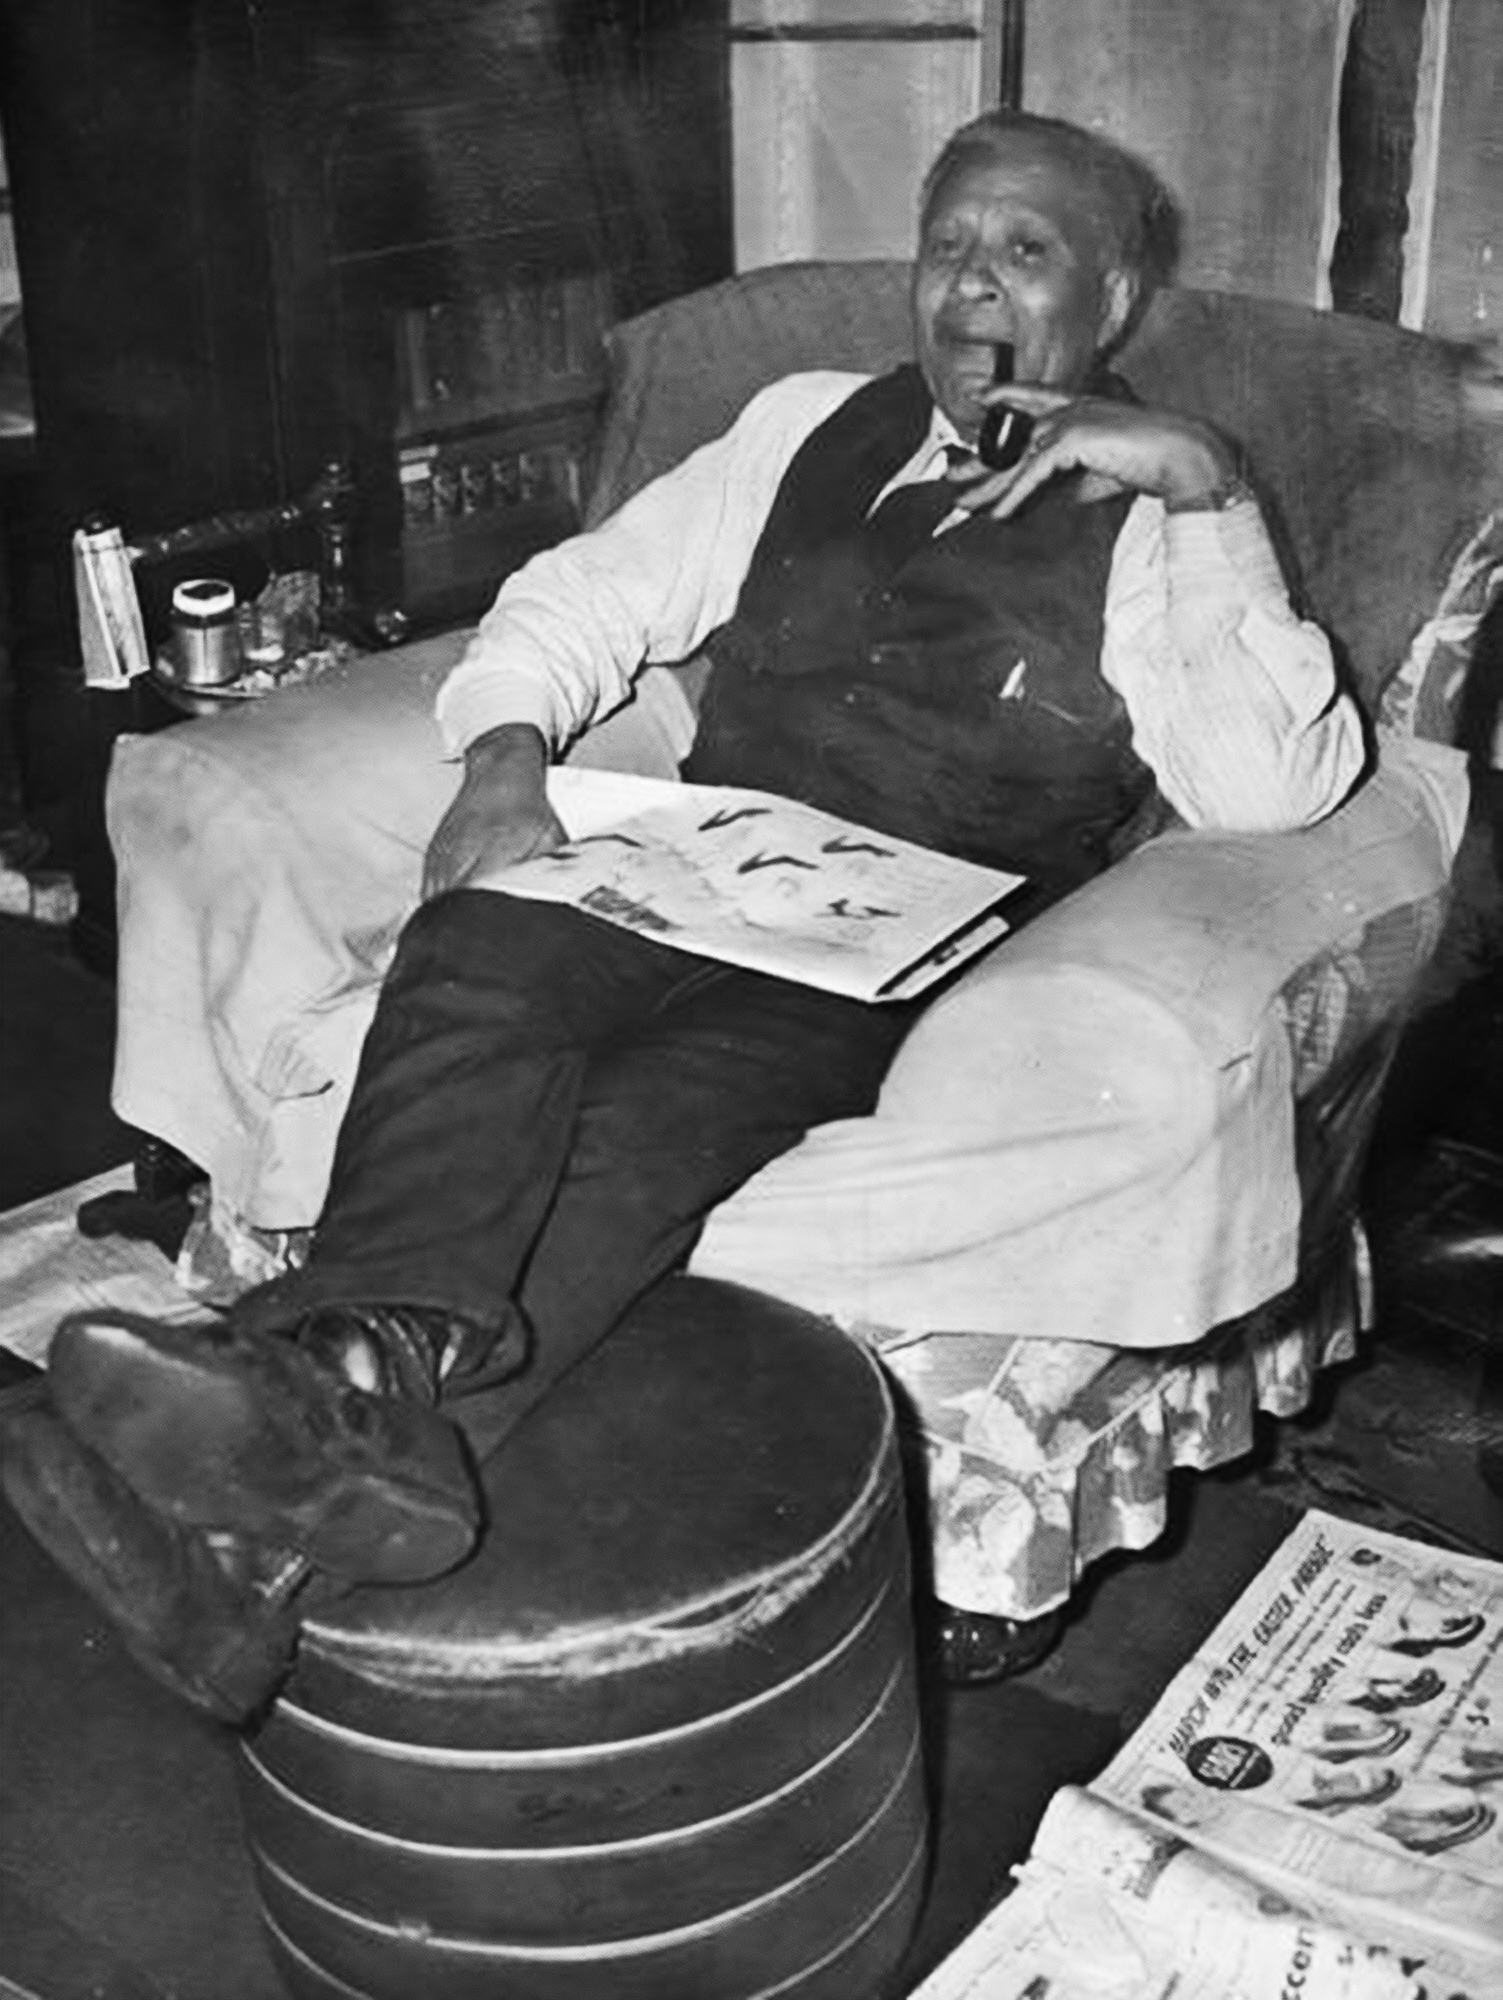 Garrett Morgan, in a vest and tie with a newspaper on his lap, relaxes in an armchair while smoking a pipe